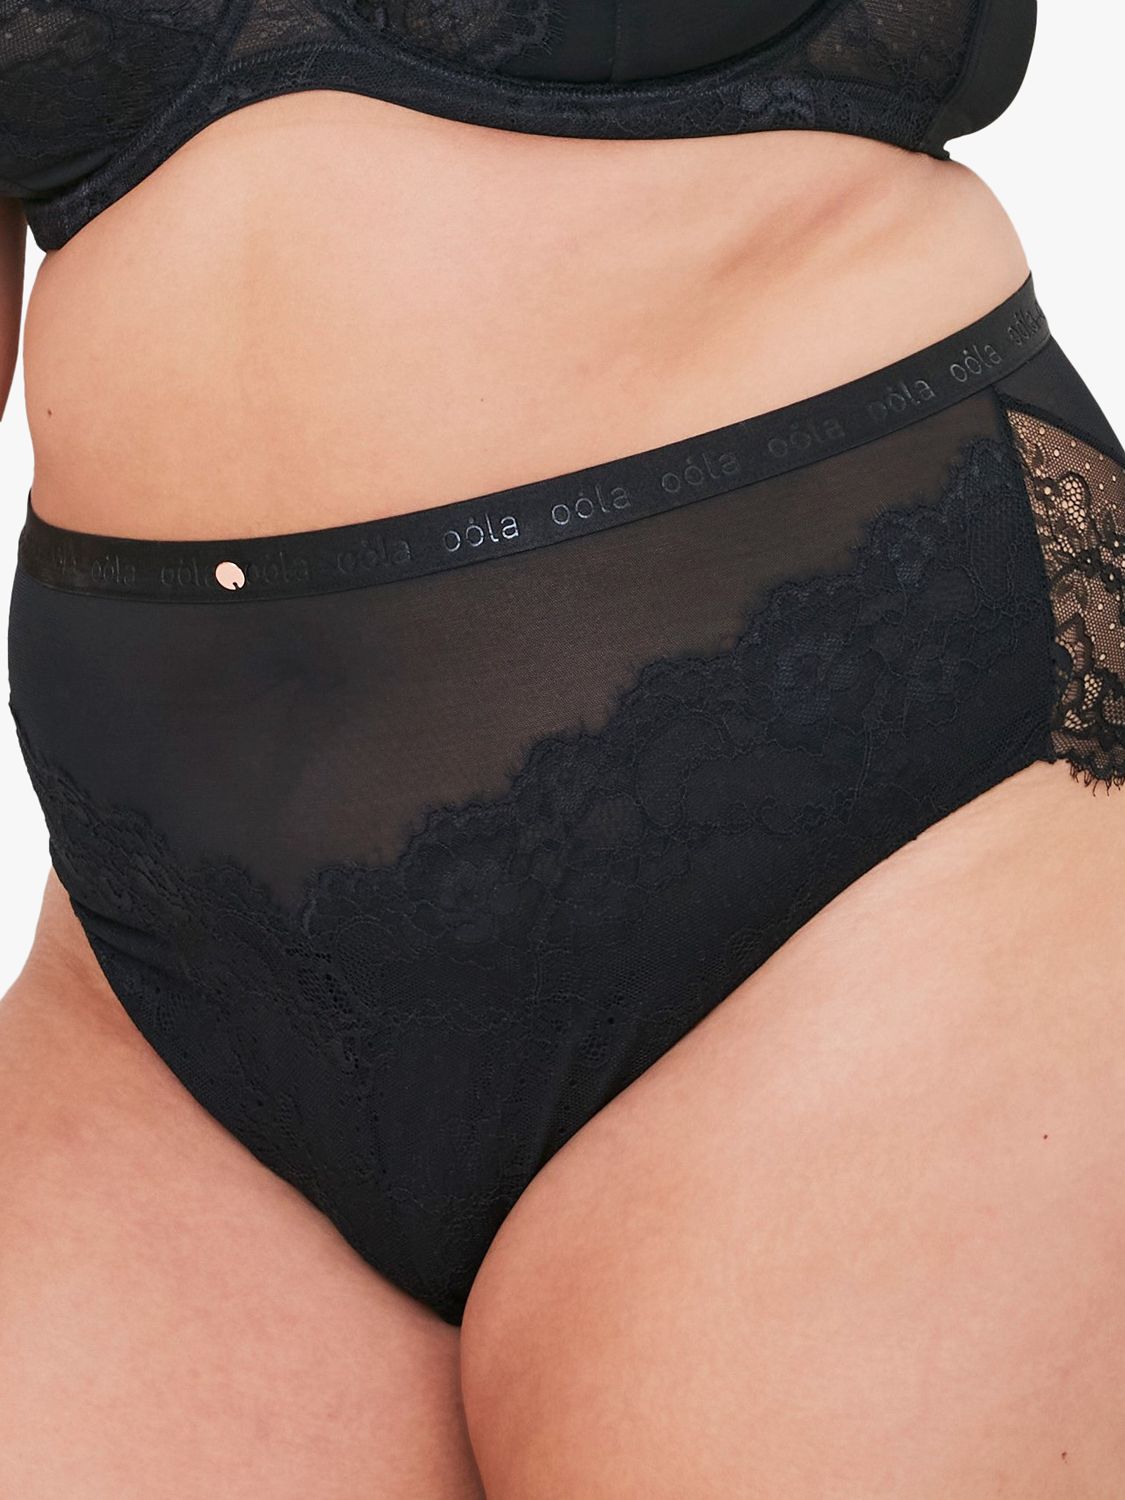 Oola Lingerie Lace and Logo High Waist Knickers, Black, 14-16